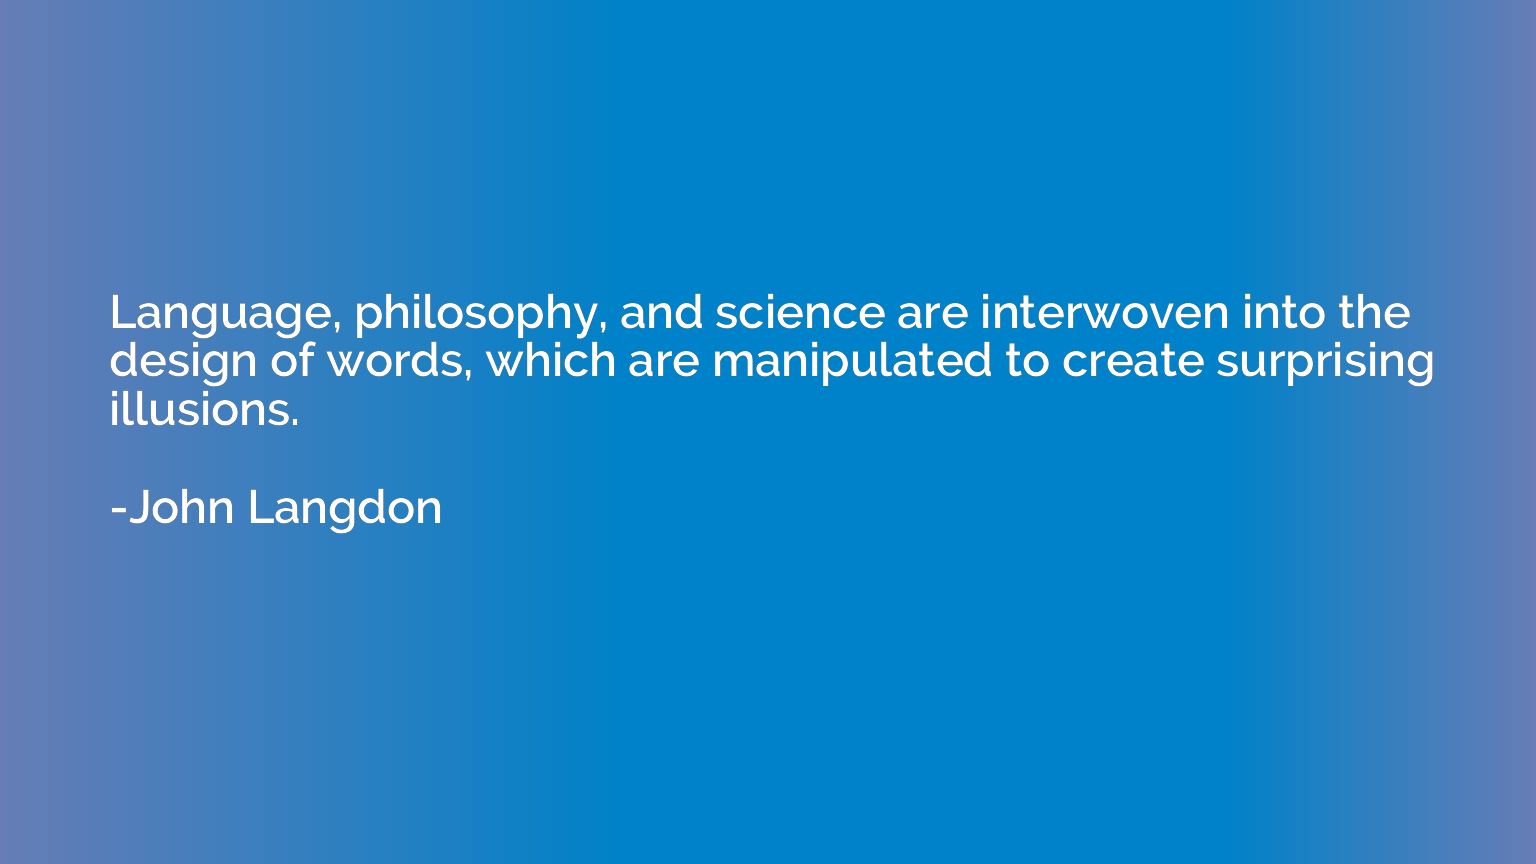 Language, philosophy, and science are interwoven into the de